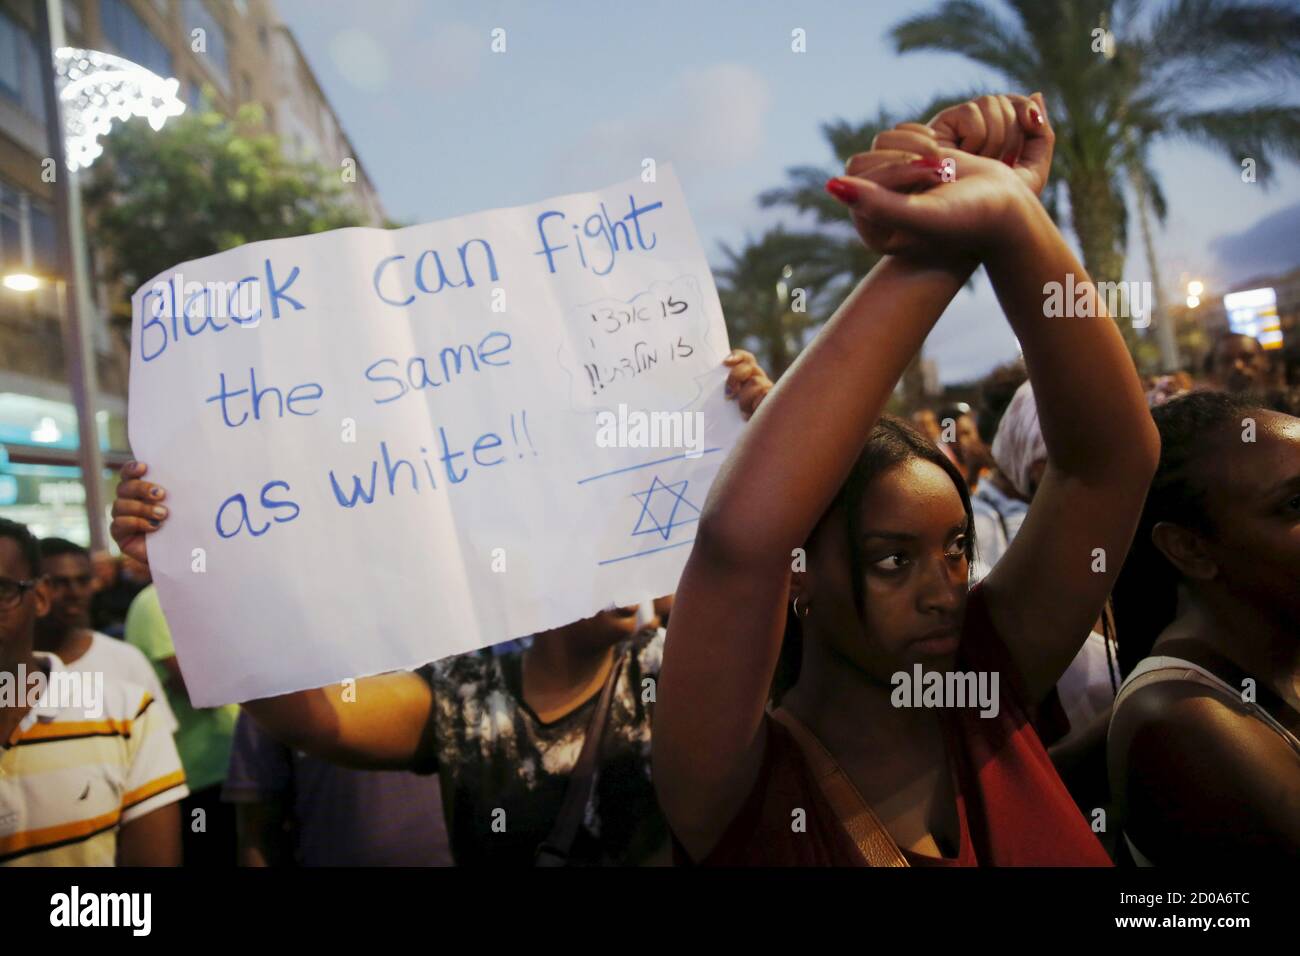 A protester, who is an Israeli Jew of Ethiopian origin, holds her hands up during a demonstration against what they say is police racism and brutality in Tel Aviv June 22, 2015. REUTERS/Baz Ratner Stock Photo